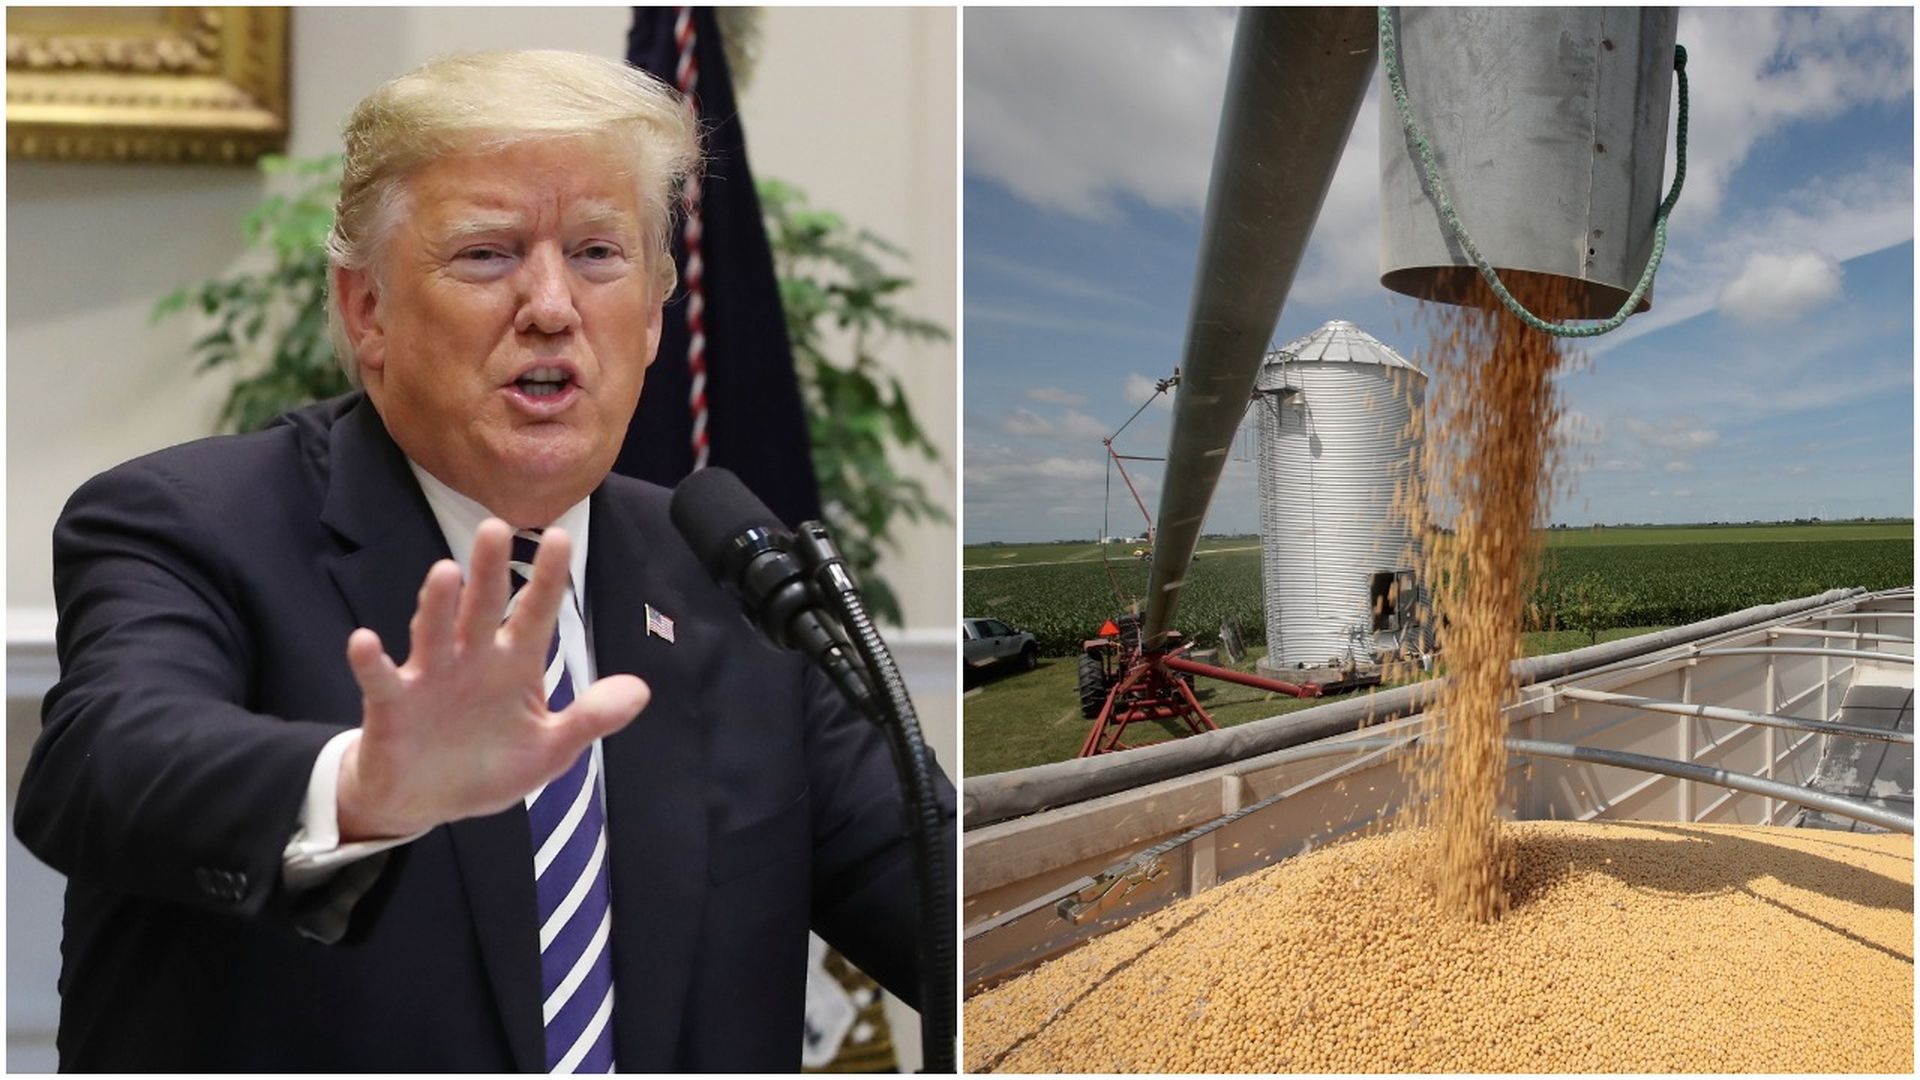 Trump and soybeans